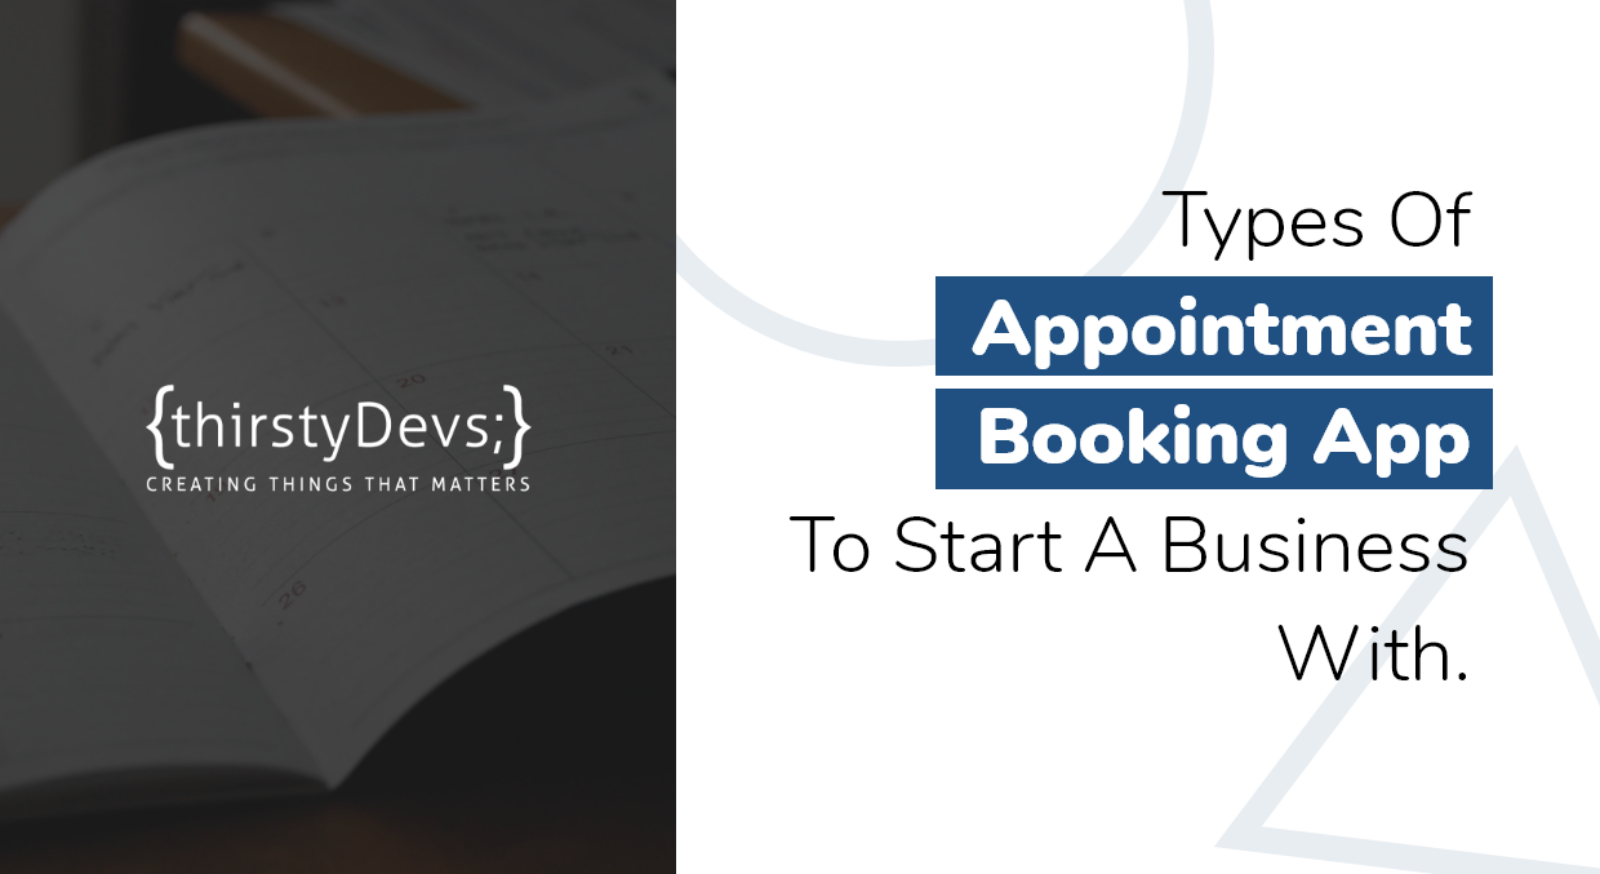 Know the appointment booking apps.